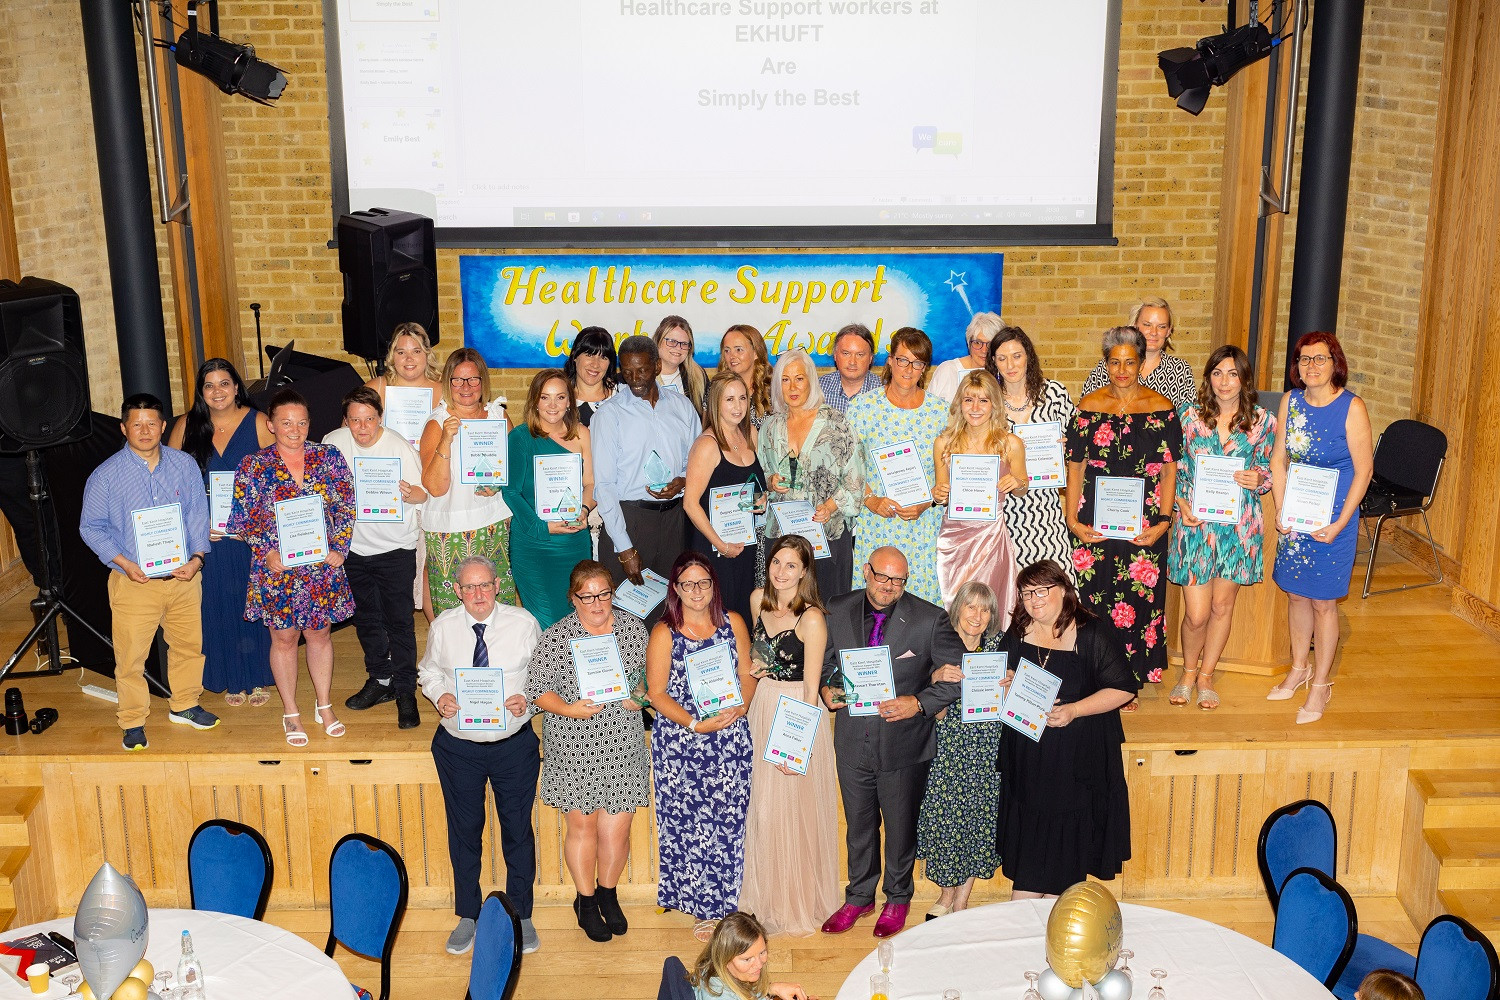 Group photo of the winners and finalists from the Healthcare Support Workers Awards - image shows a group of people on a stage holding certificates and awards